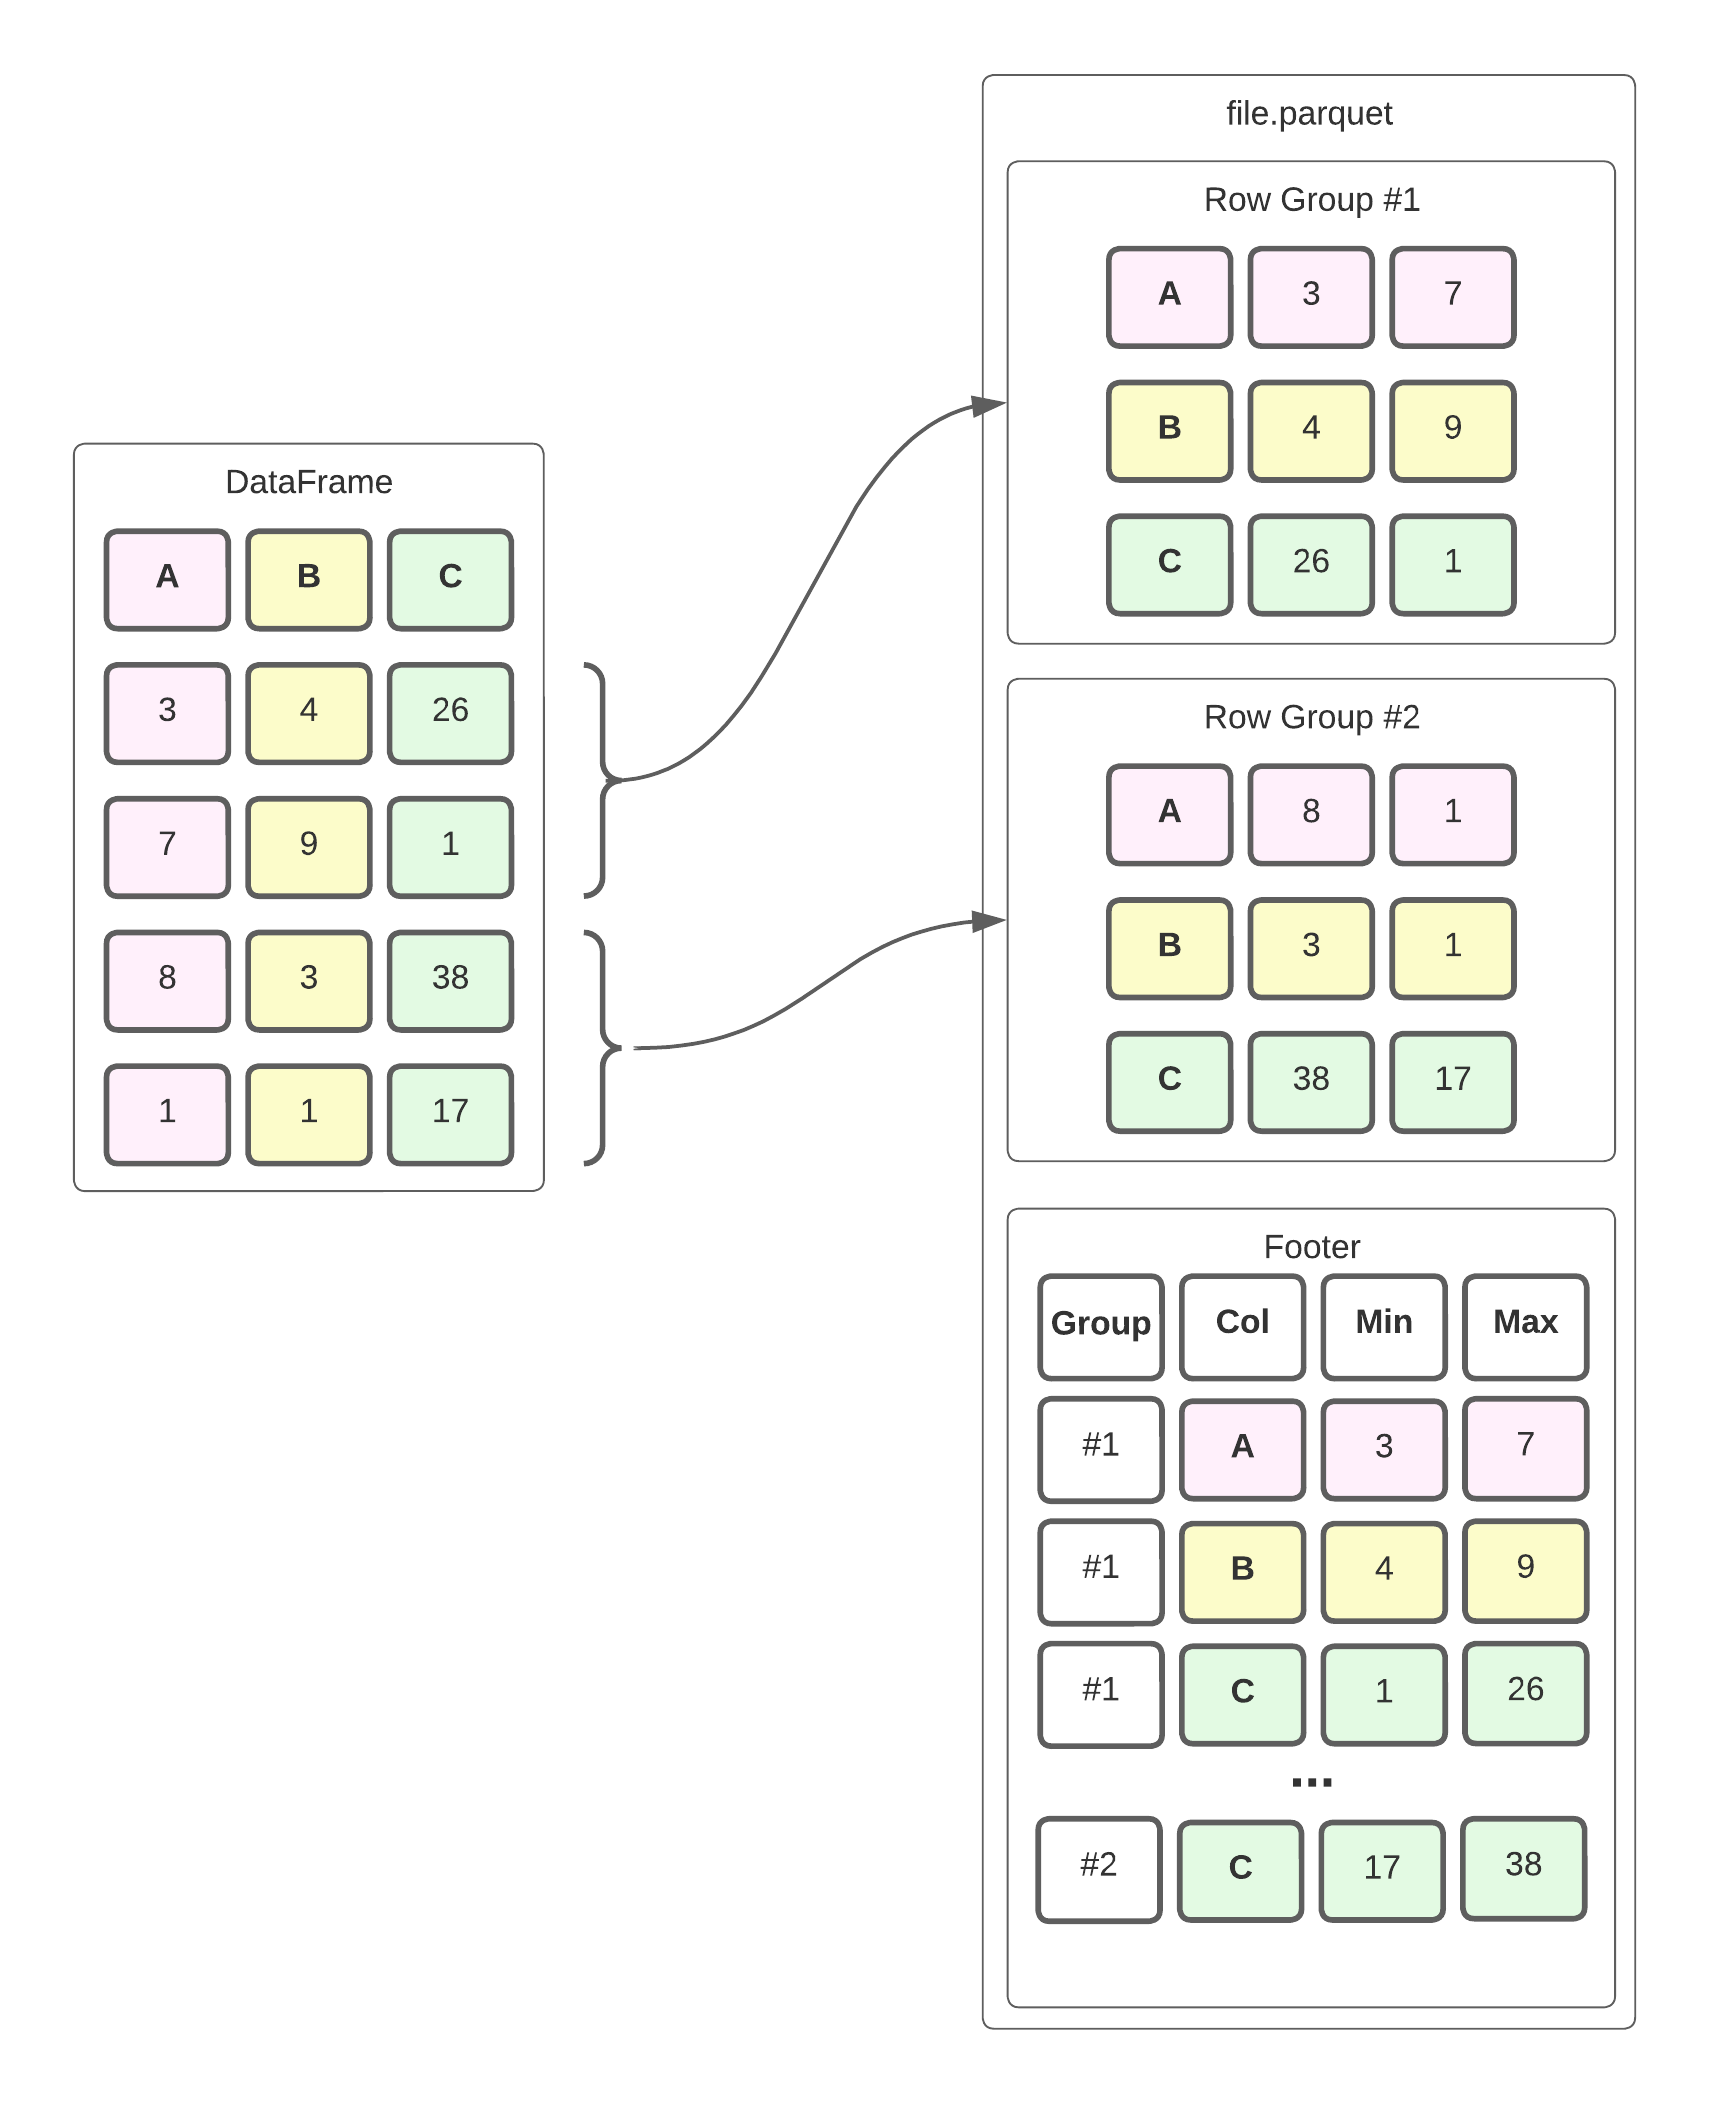 DataFrame to Parquet Mapping